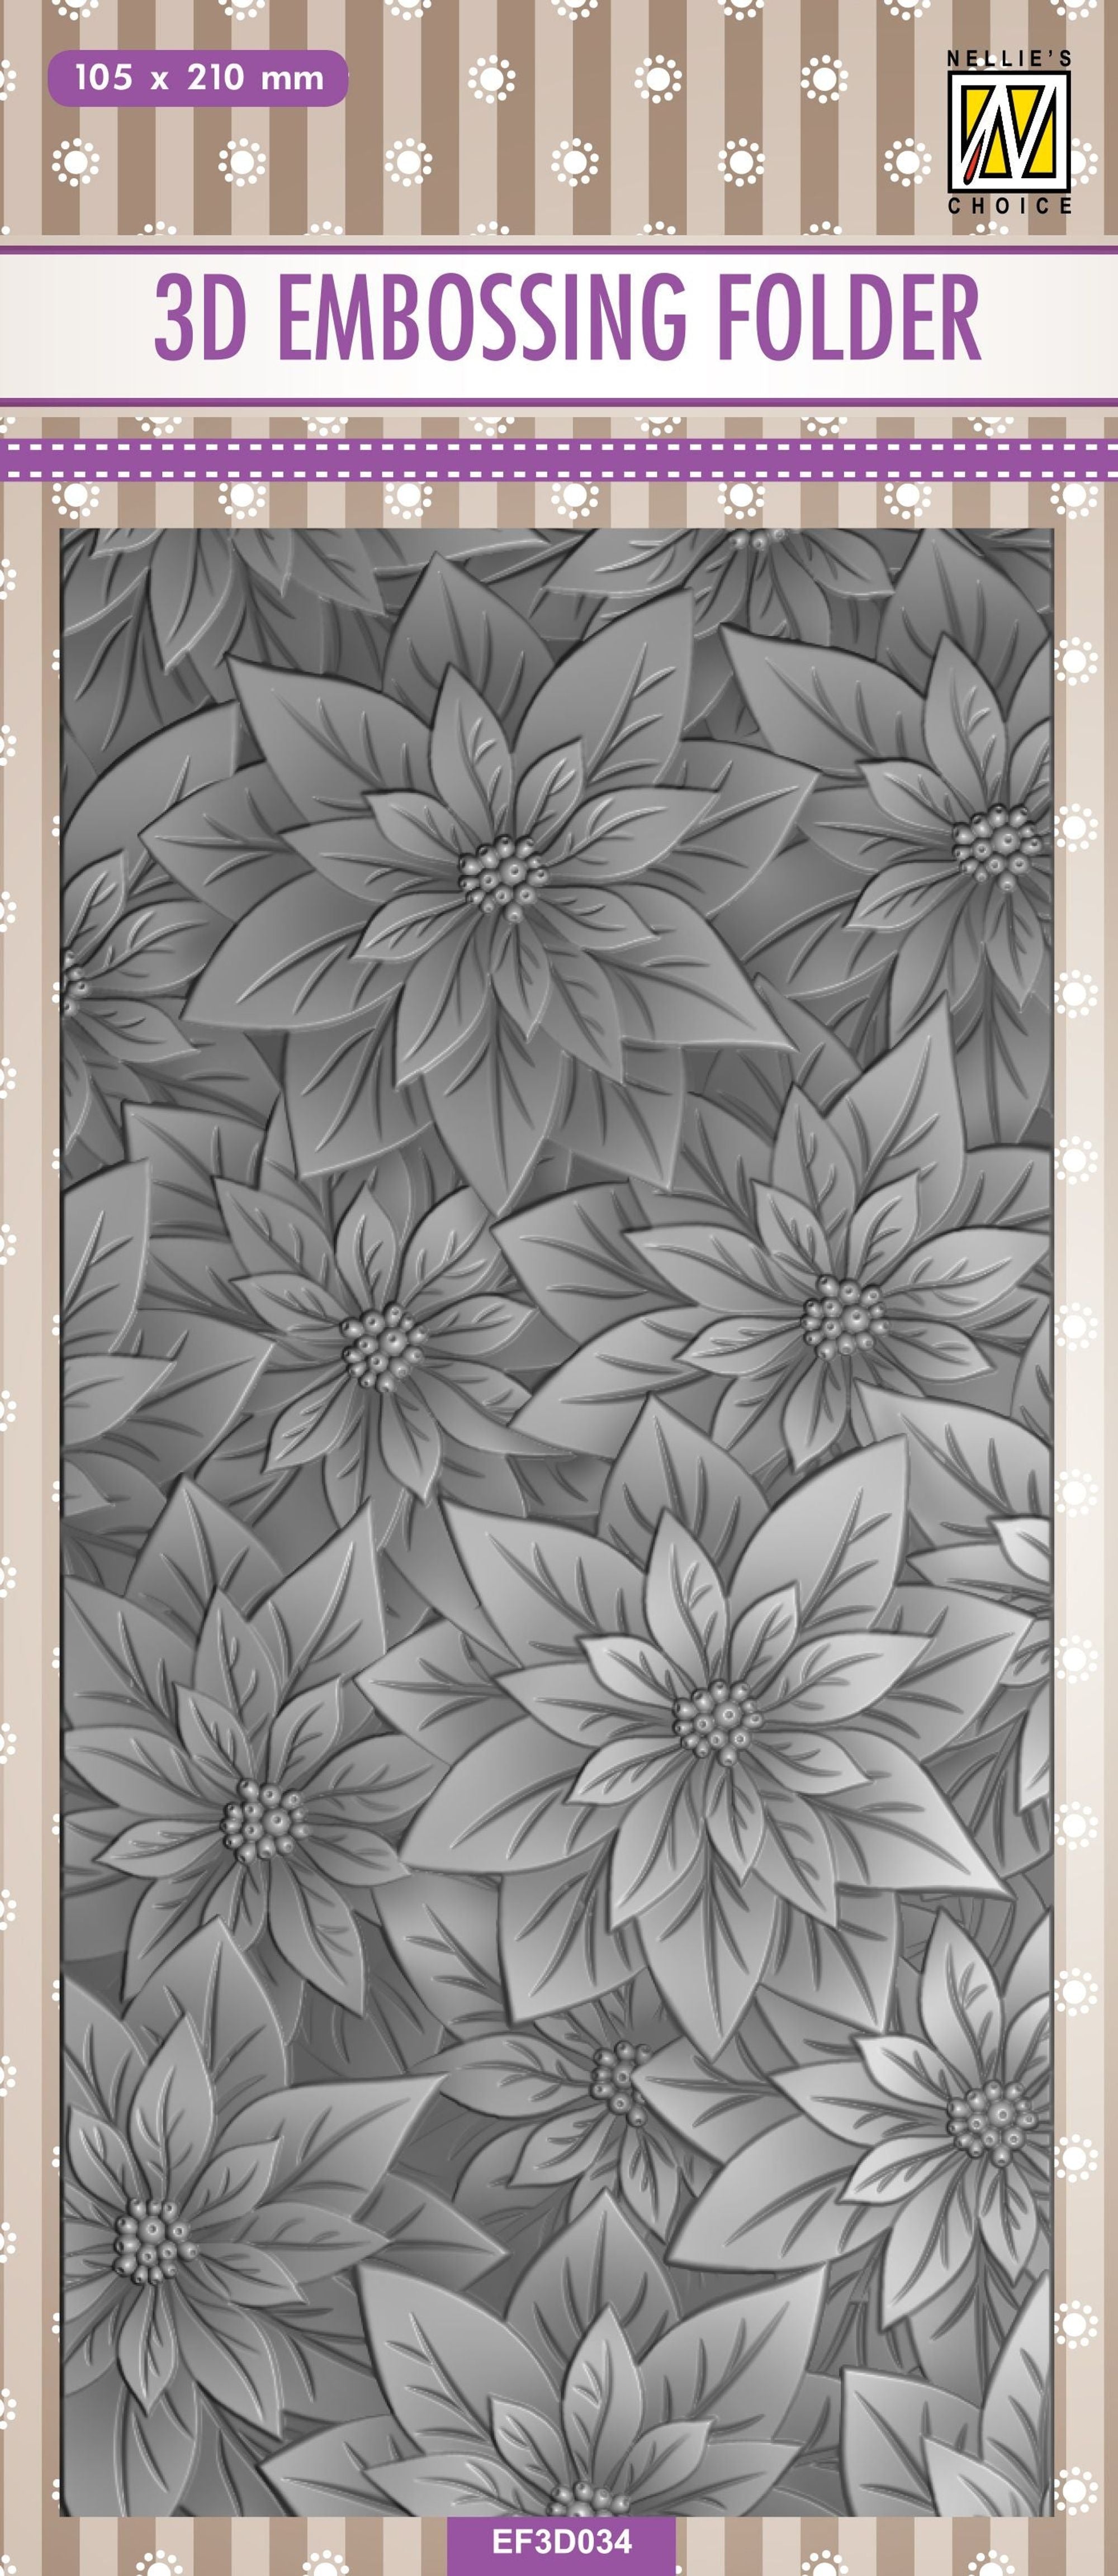 Nellie's Choice 4 x 6 3D Embossing Folder Branch with Flowers